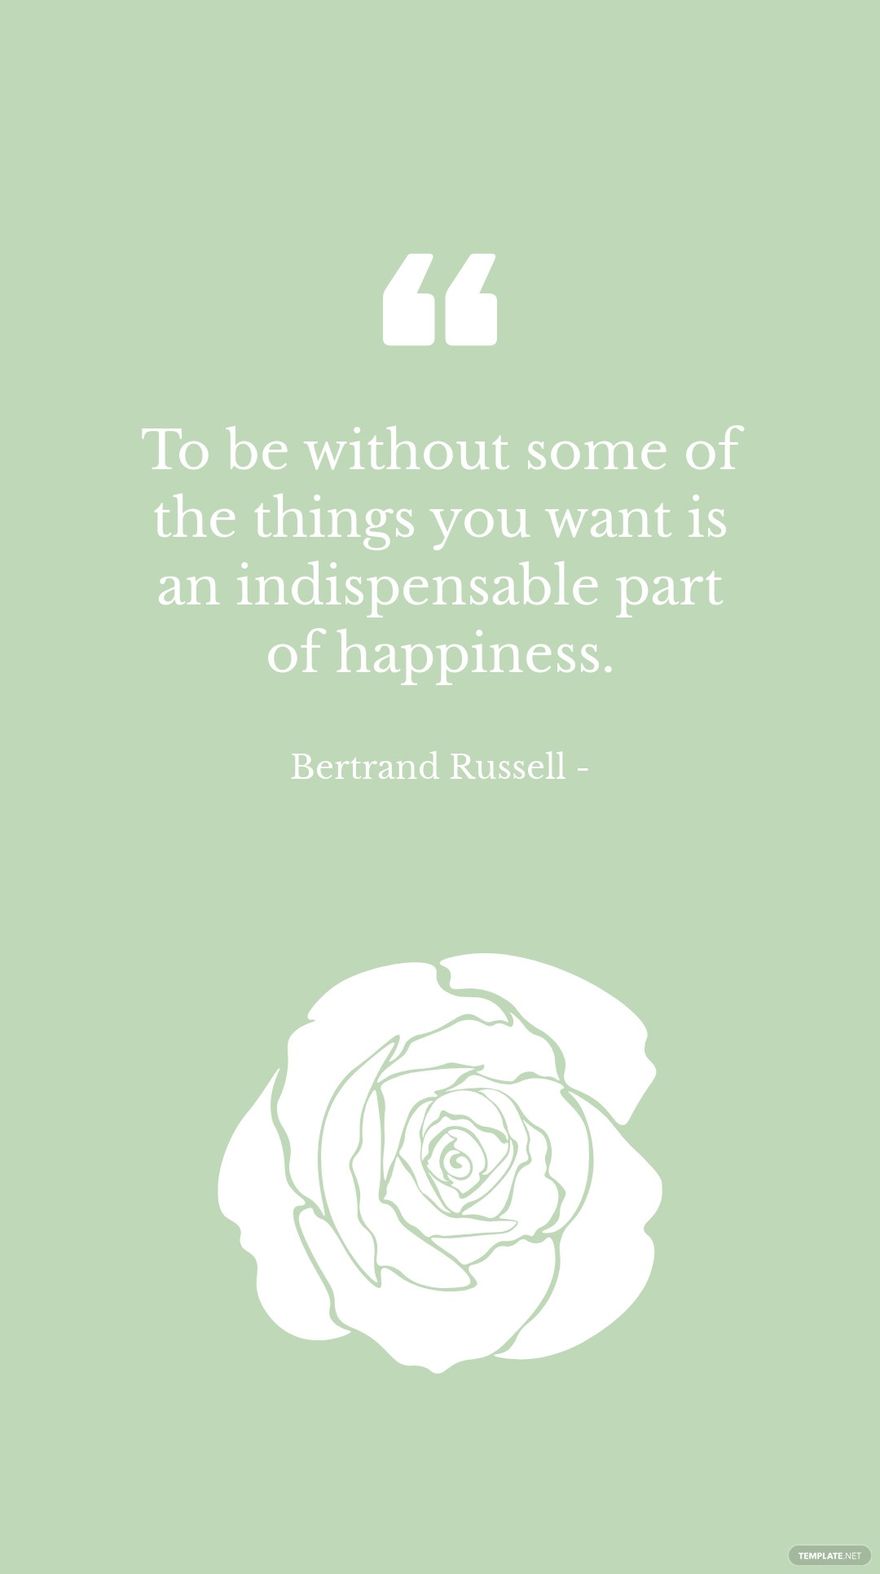 Bertrand Russell - To be without some of the things you want is an indispensable part of happiness. in JPG